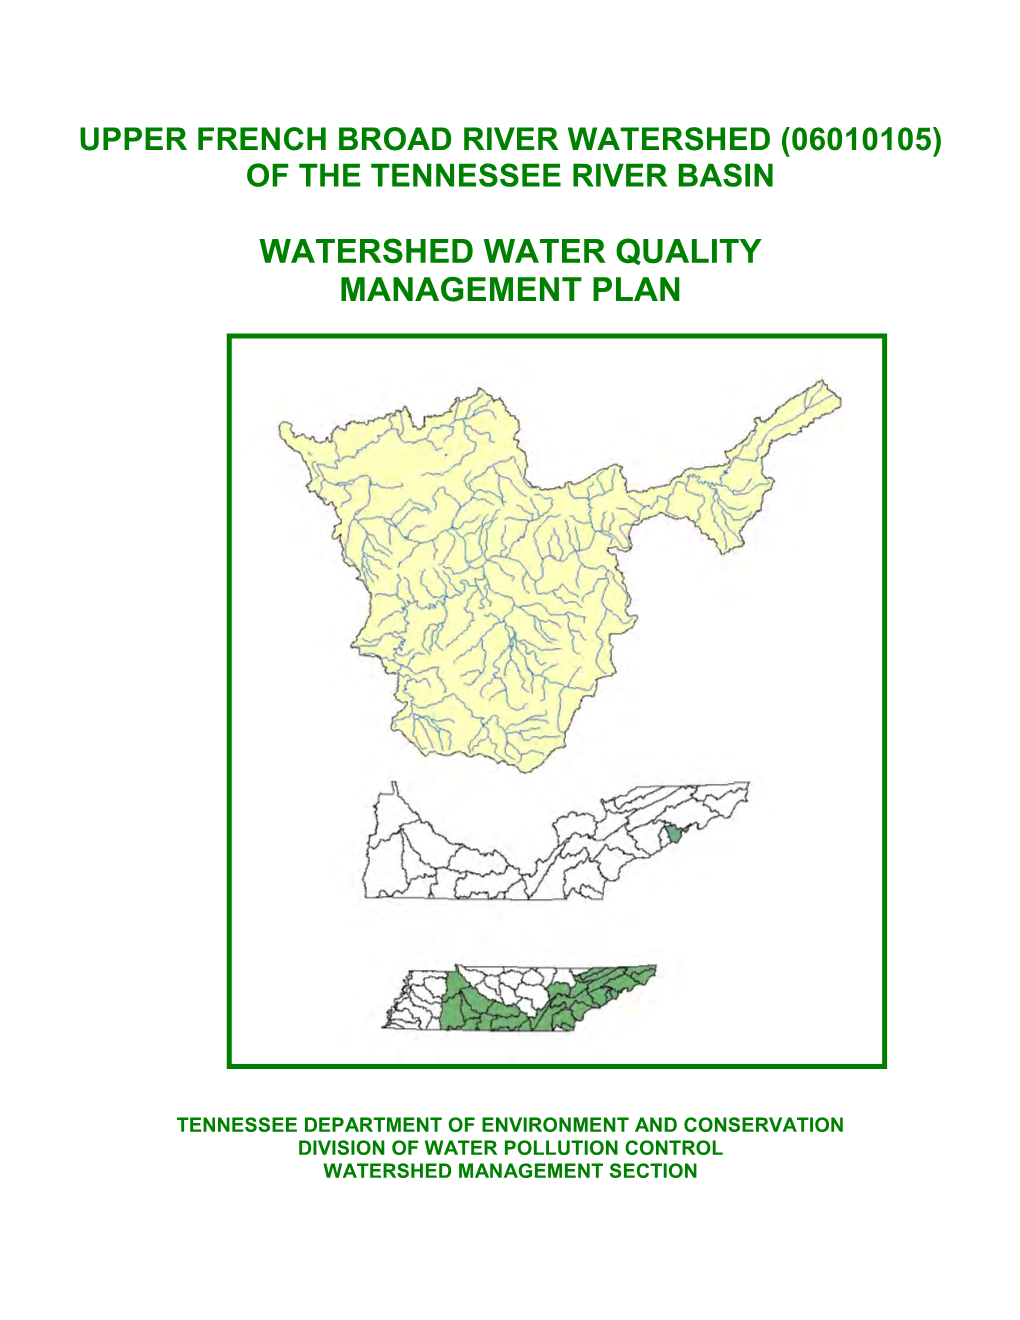 Upper French Broad Water Quality Management Plan